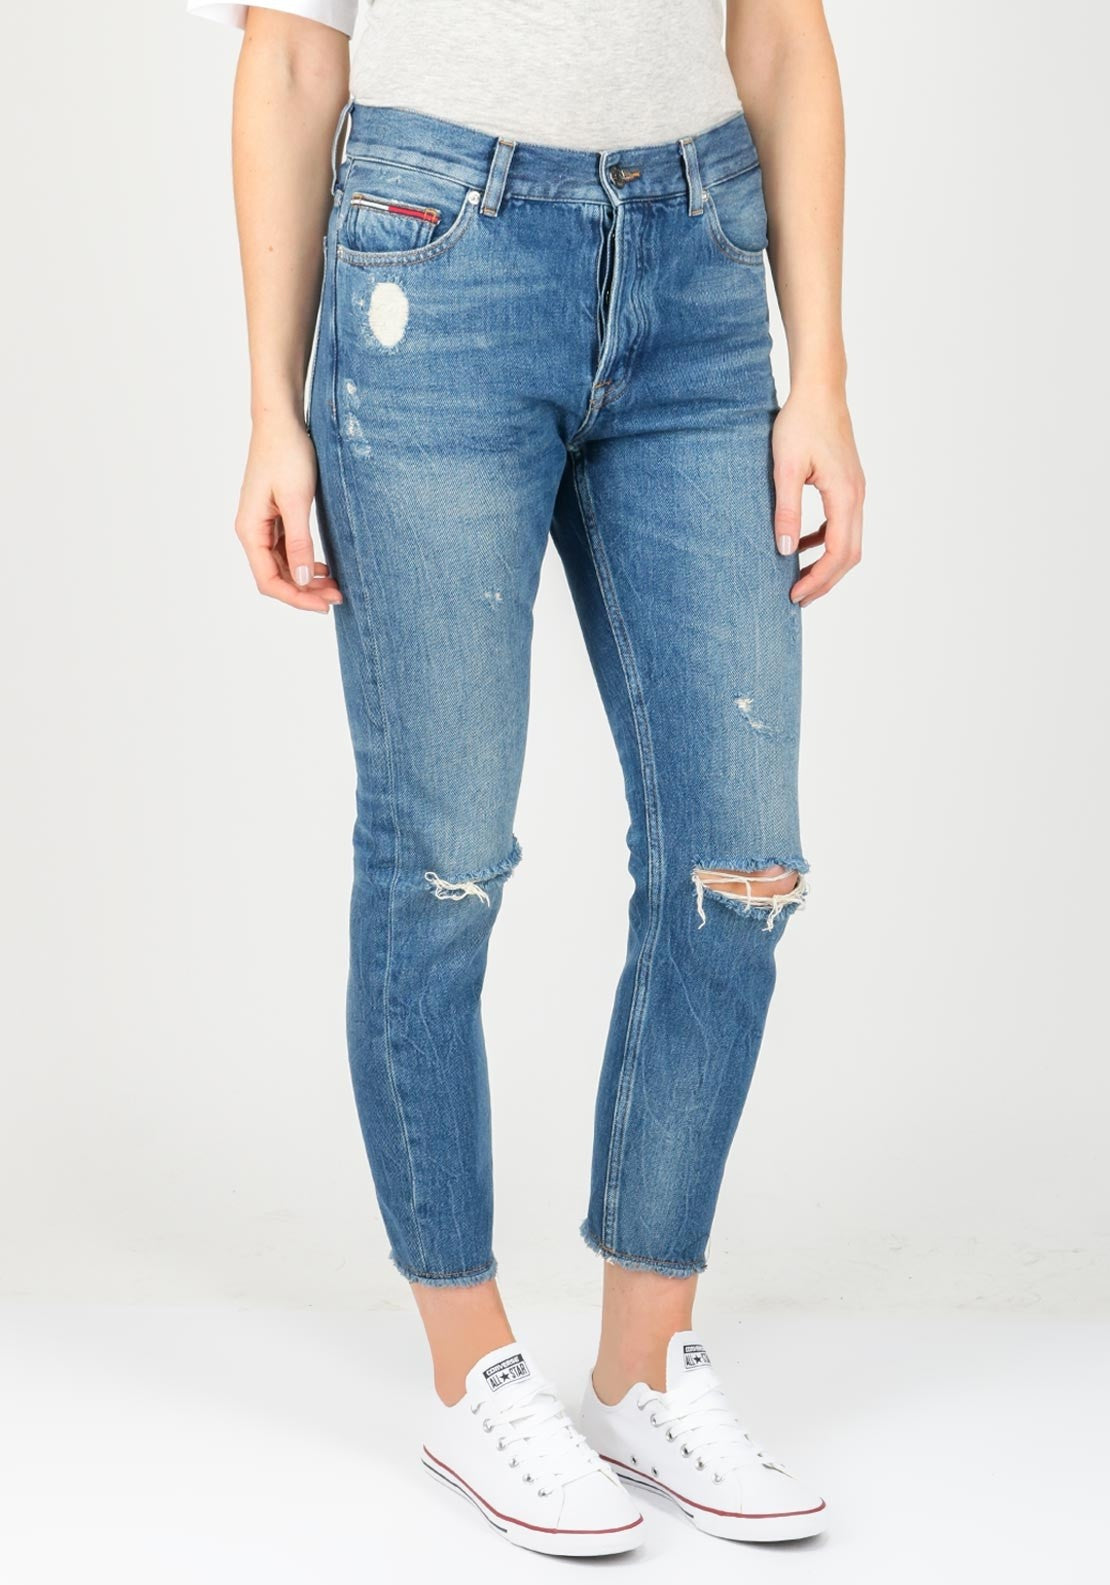 tommy hilfiger ripped jeans womens